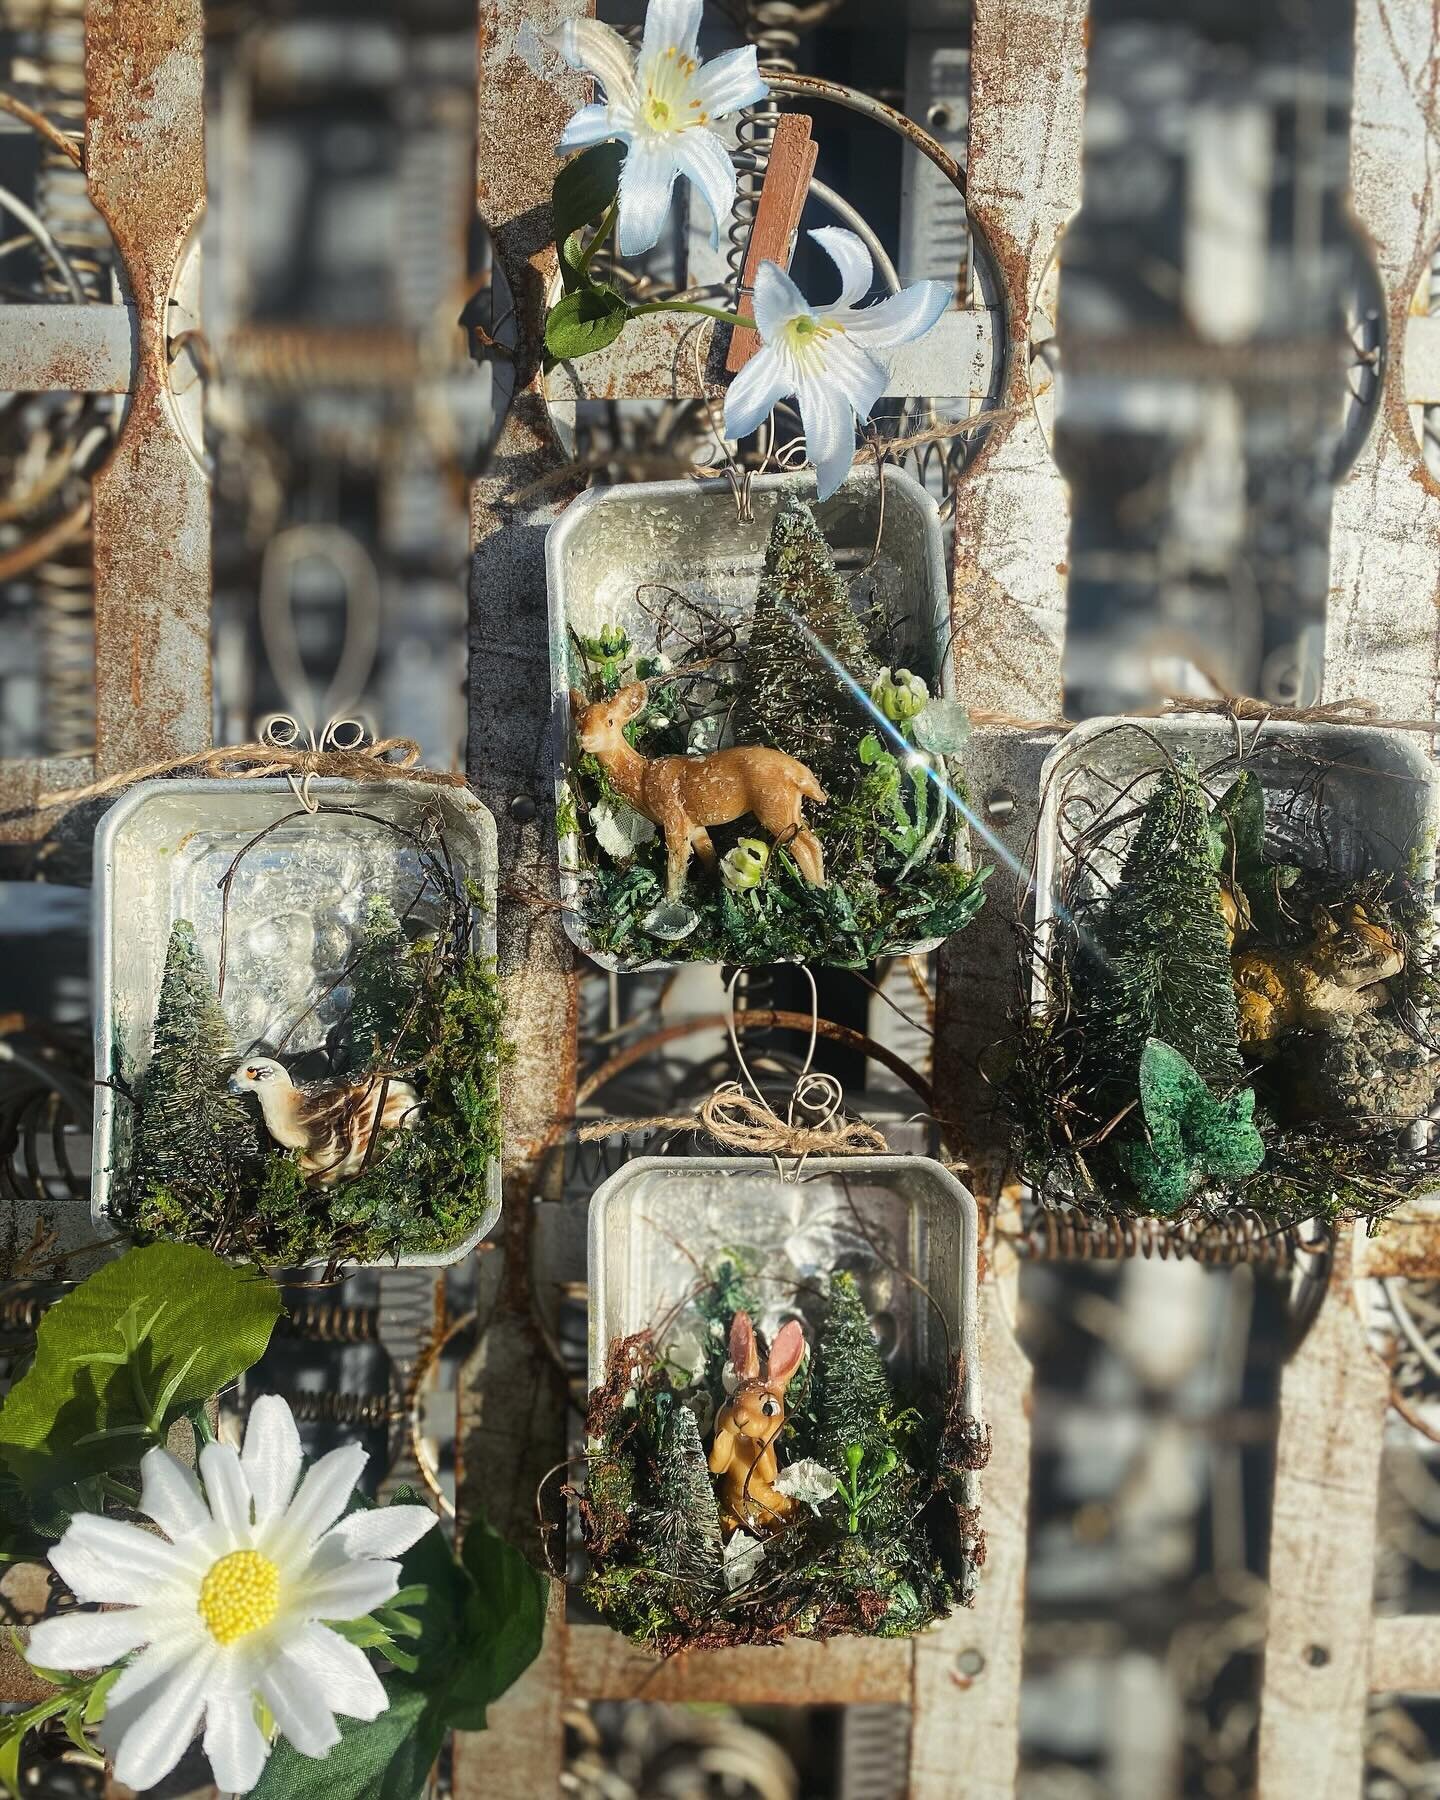 ✨New in Booth 56 at @antiquesinbridgeville: Magic Woodland Tart Tin Diorama Ornaments 🦌✨

These are OOAK handmade assemblages in vintage grape-motif tart tins. Vintage forest creatures now nest within on a mixture of dried moss, tiny corsage flowers